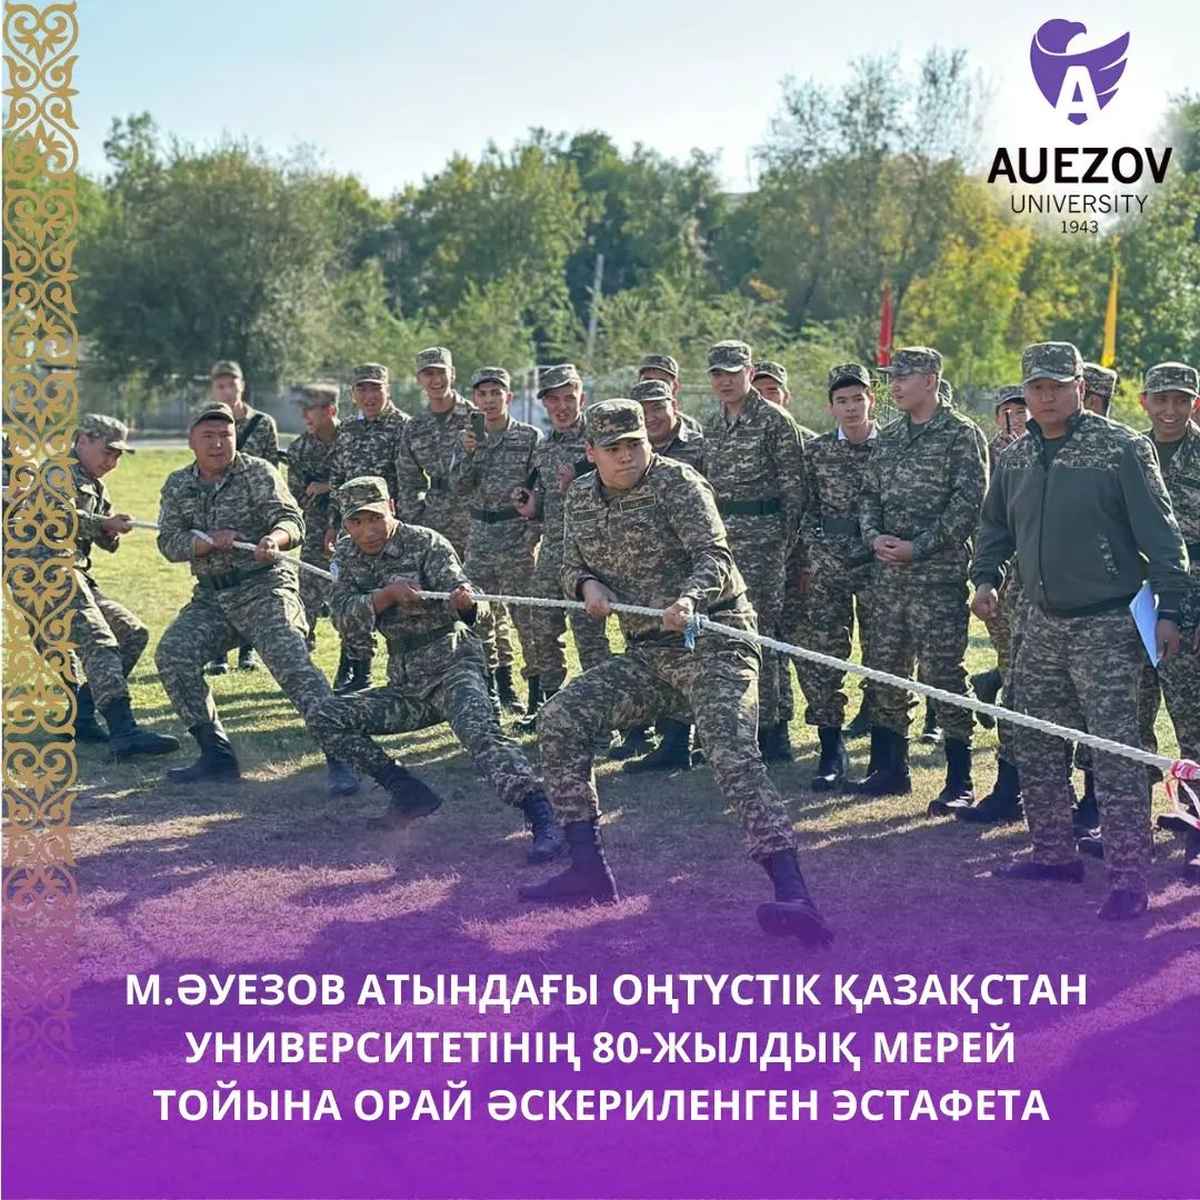 Military relay race dedicated to the 80th anniversary of the South Kazakhstan University named after M. Auezov